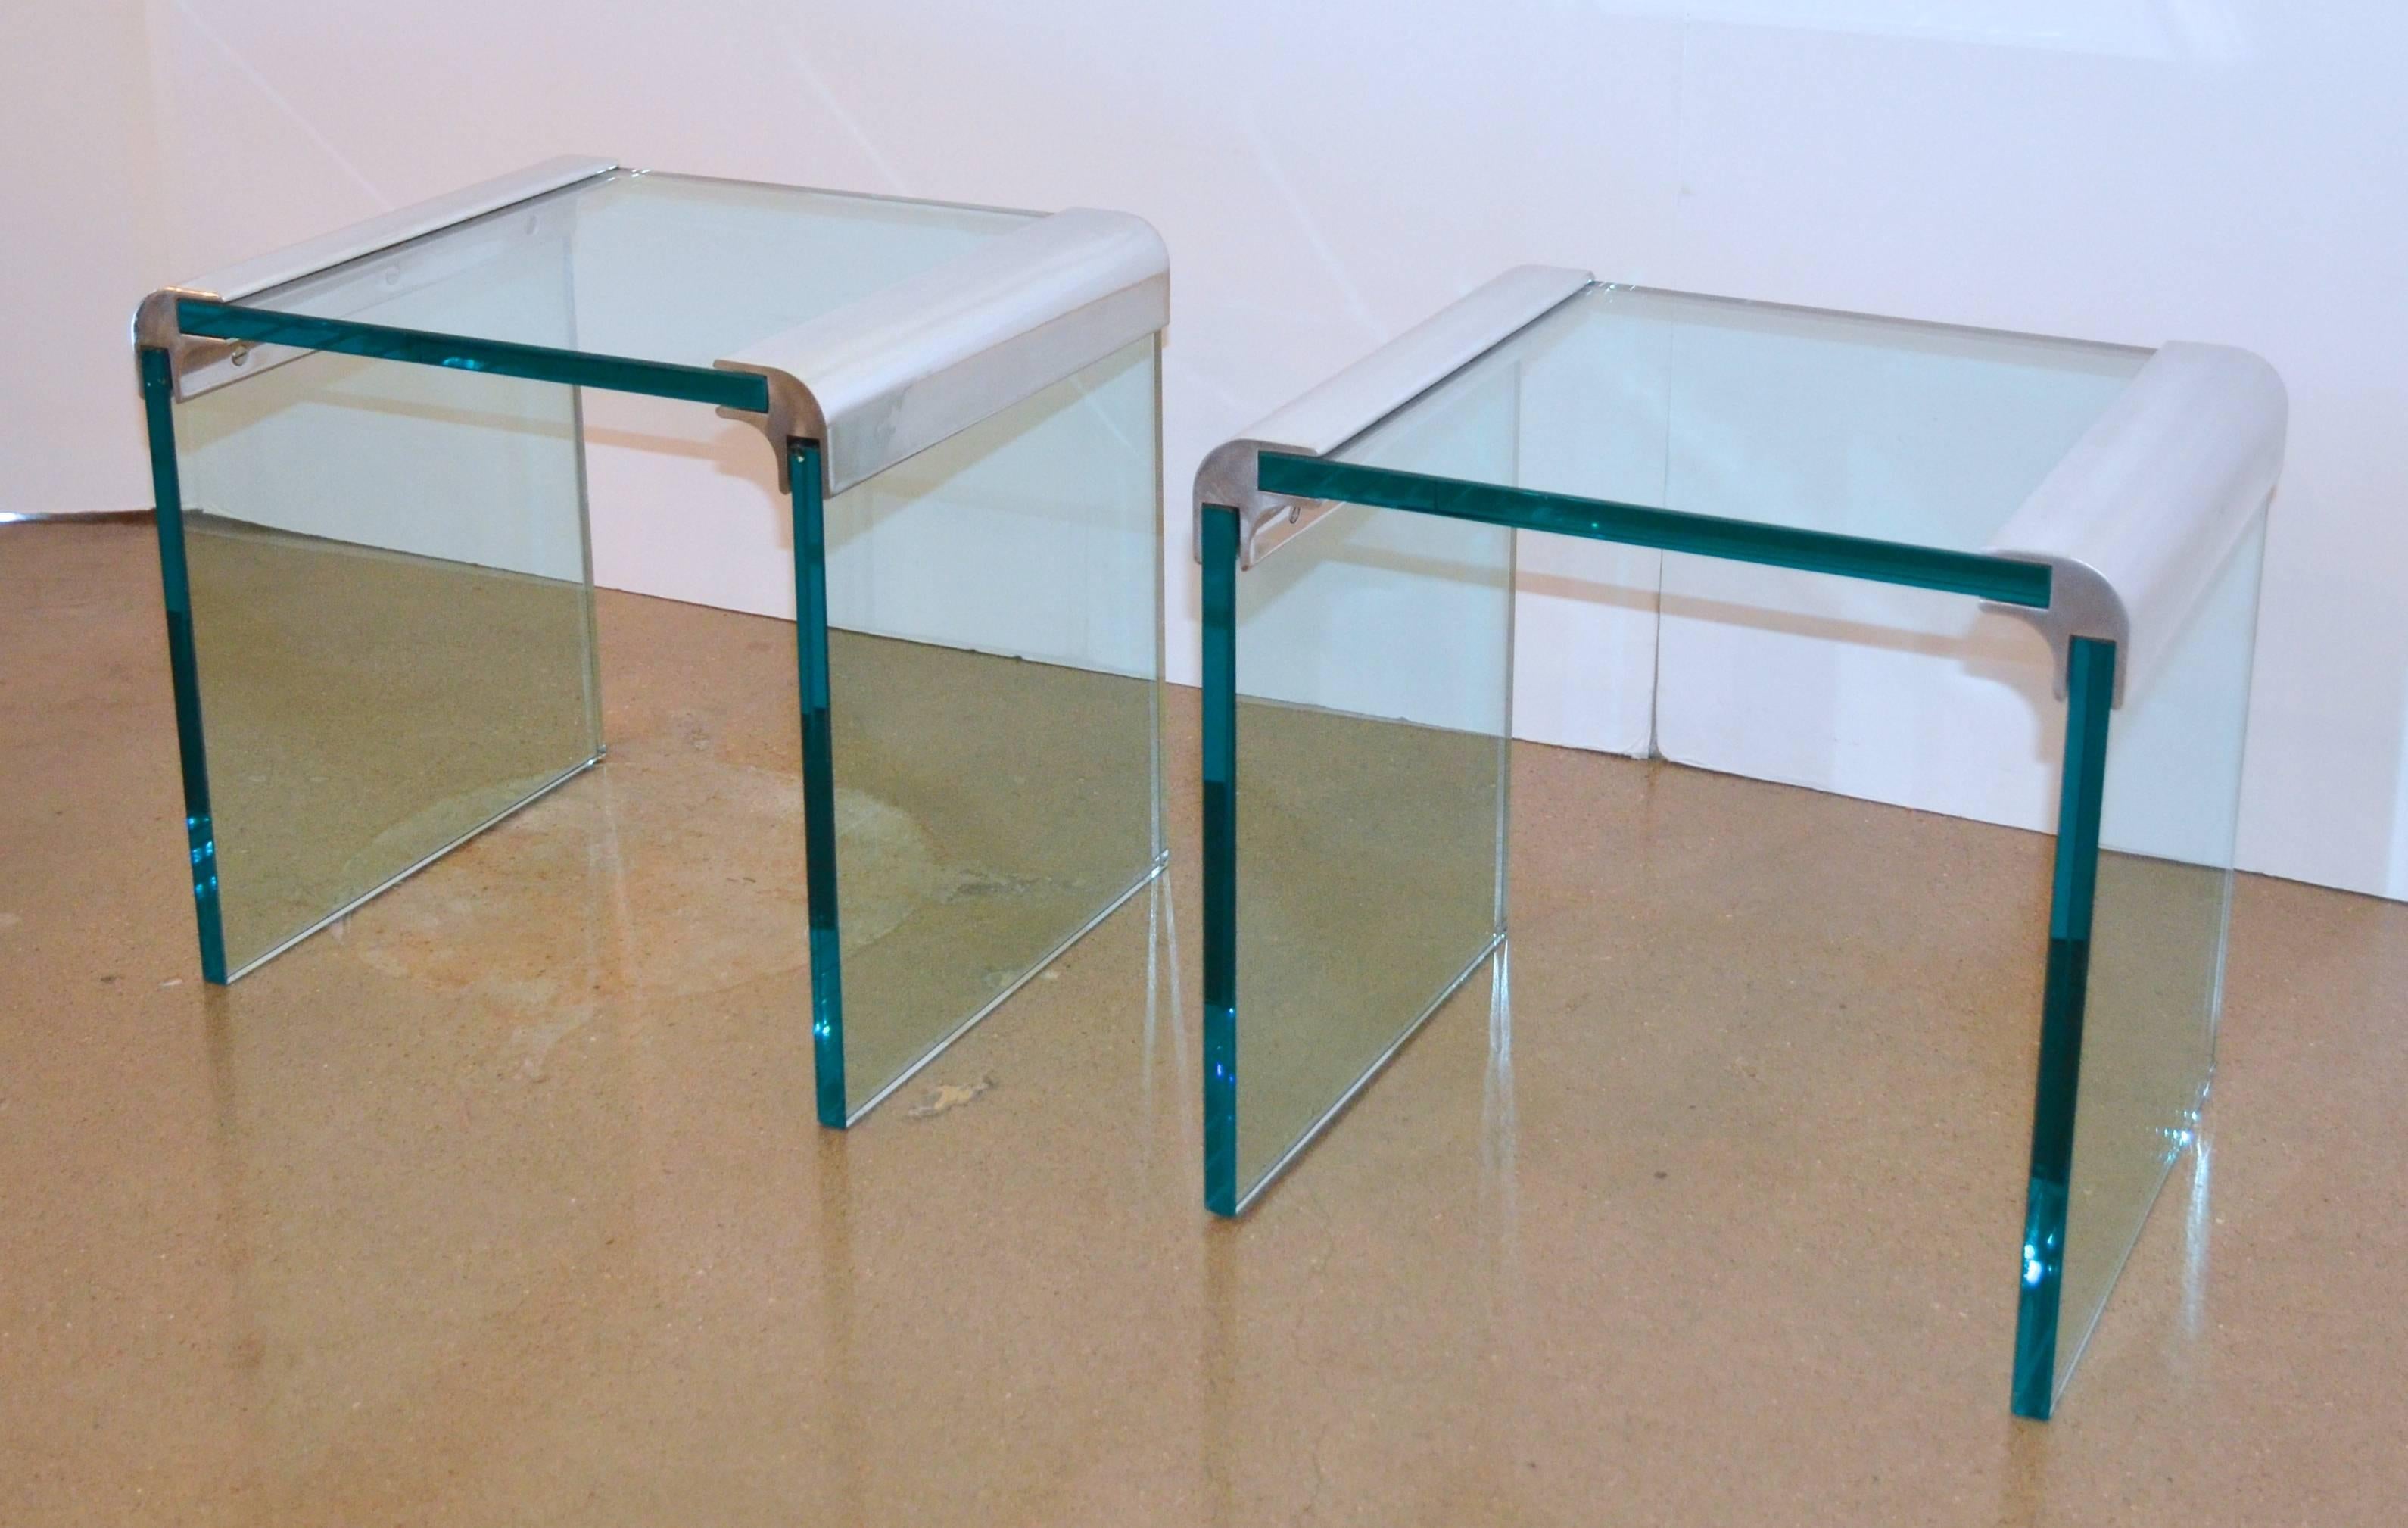 Pair of glass tables by Leon Rosen for Pace Collection. Thick 3/4